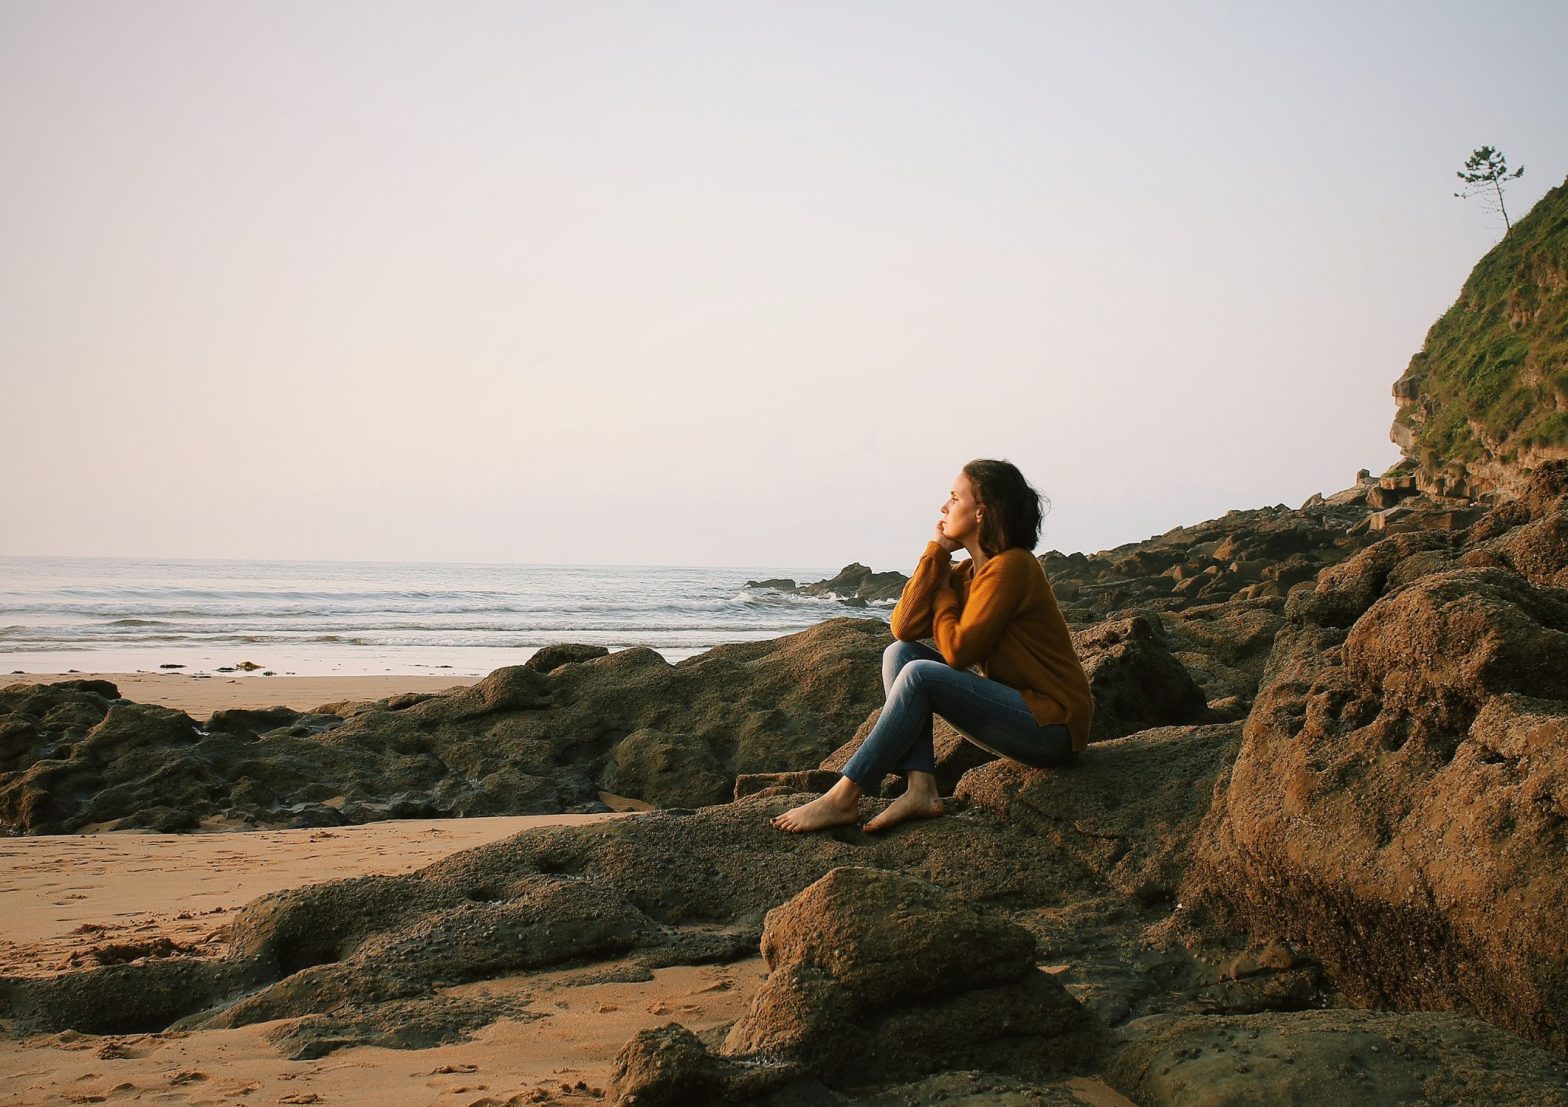 Image shows someone sitting deep in thought on the rocks, being still and mindful in the fresh air for the benefit of their mental health and wellbeing